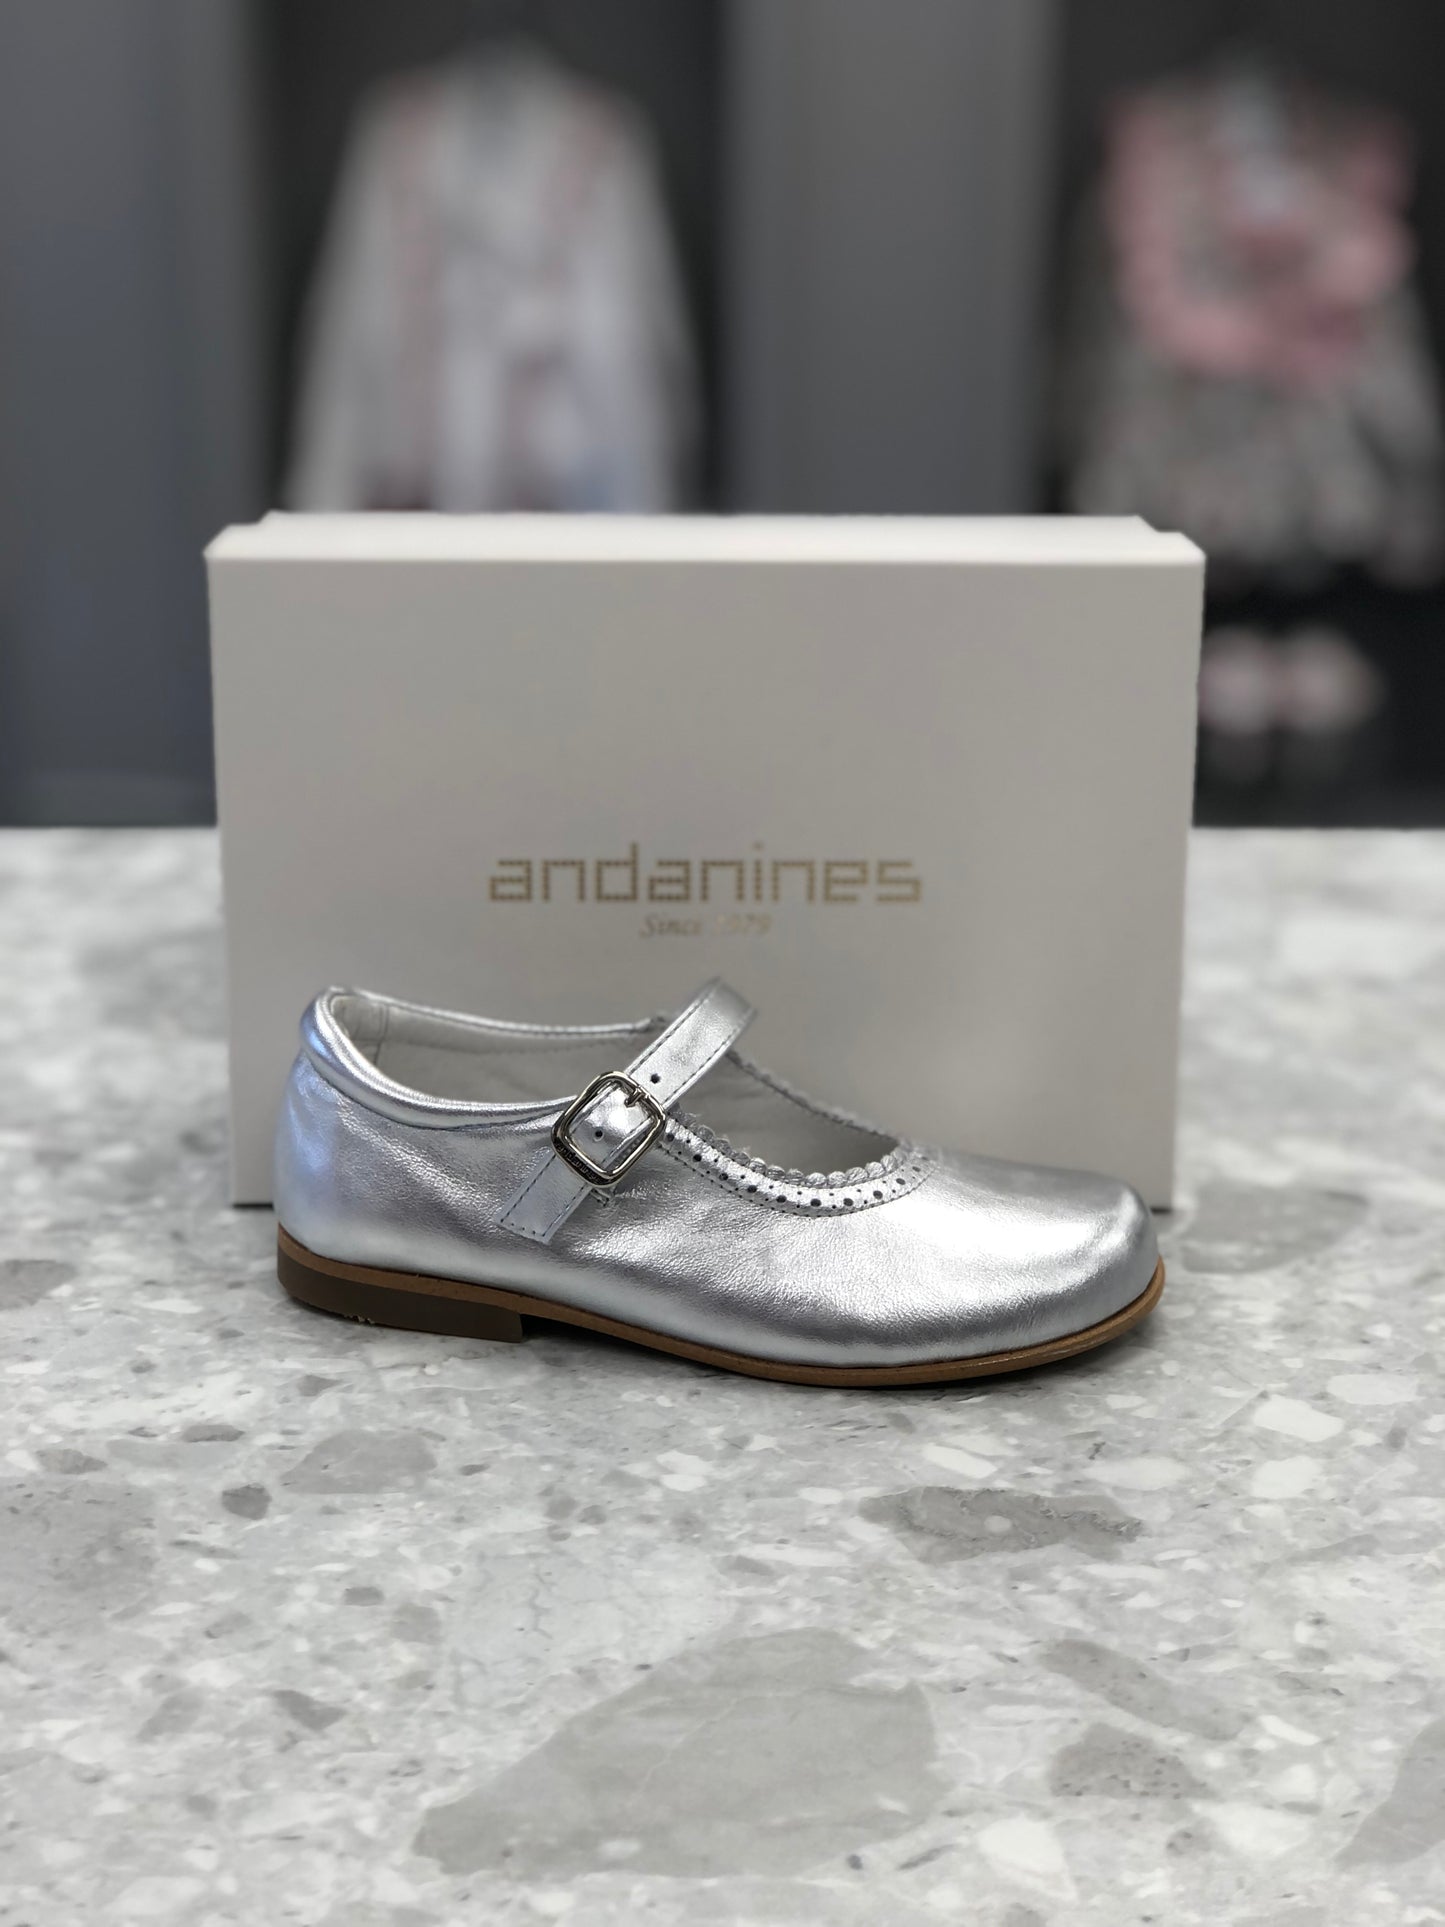 ANDANINES Silver Leather Girls Mary Jane Shoes